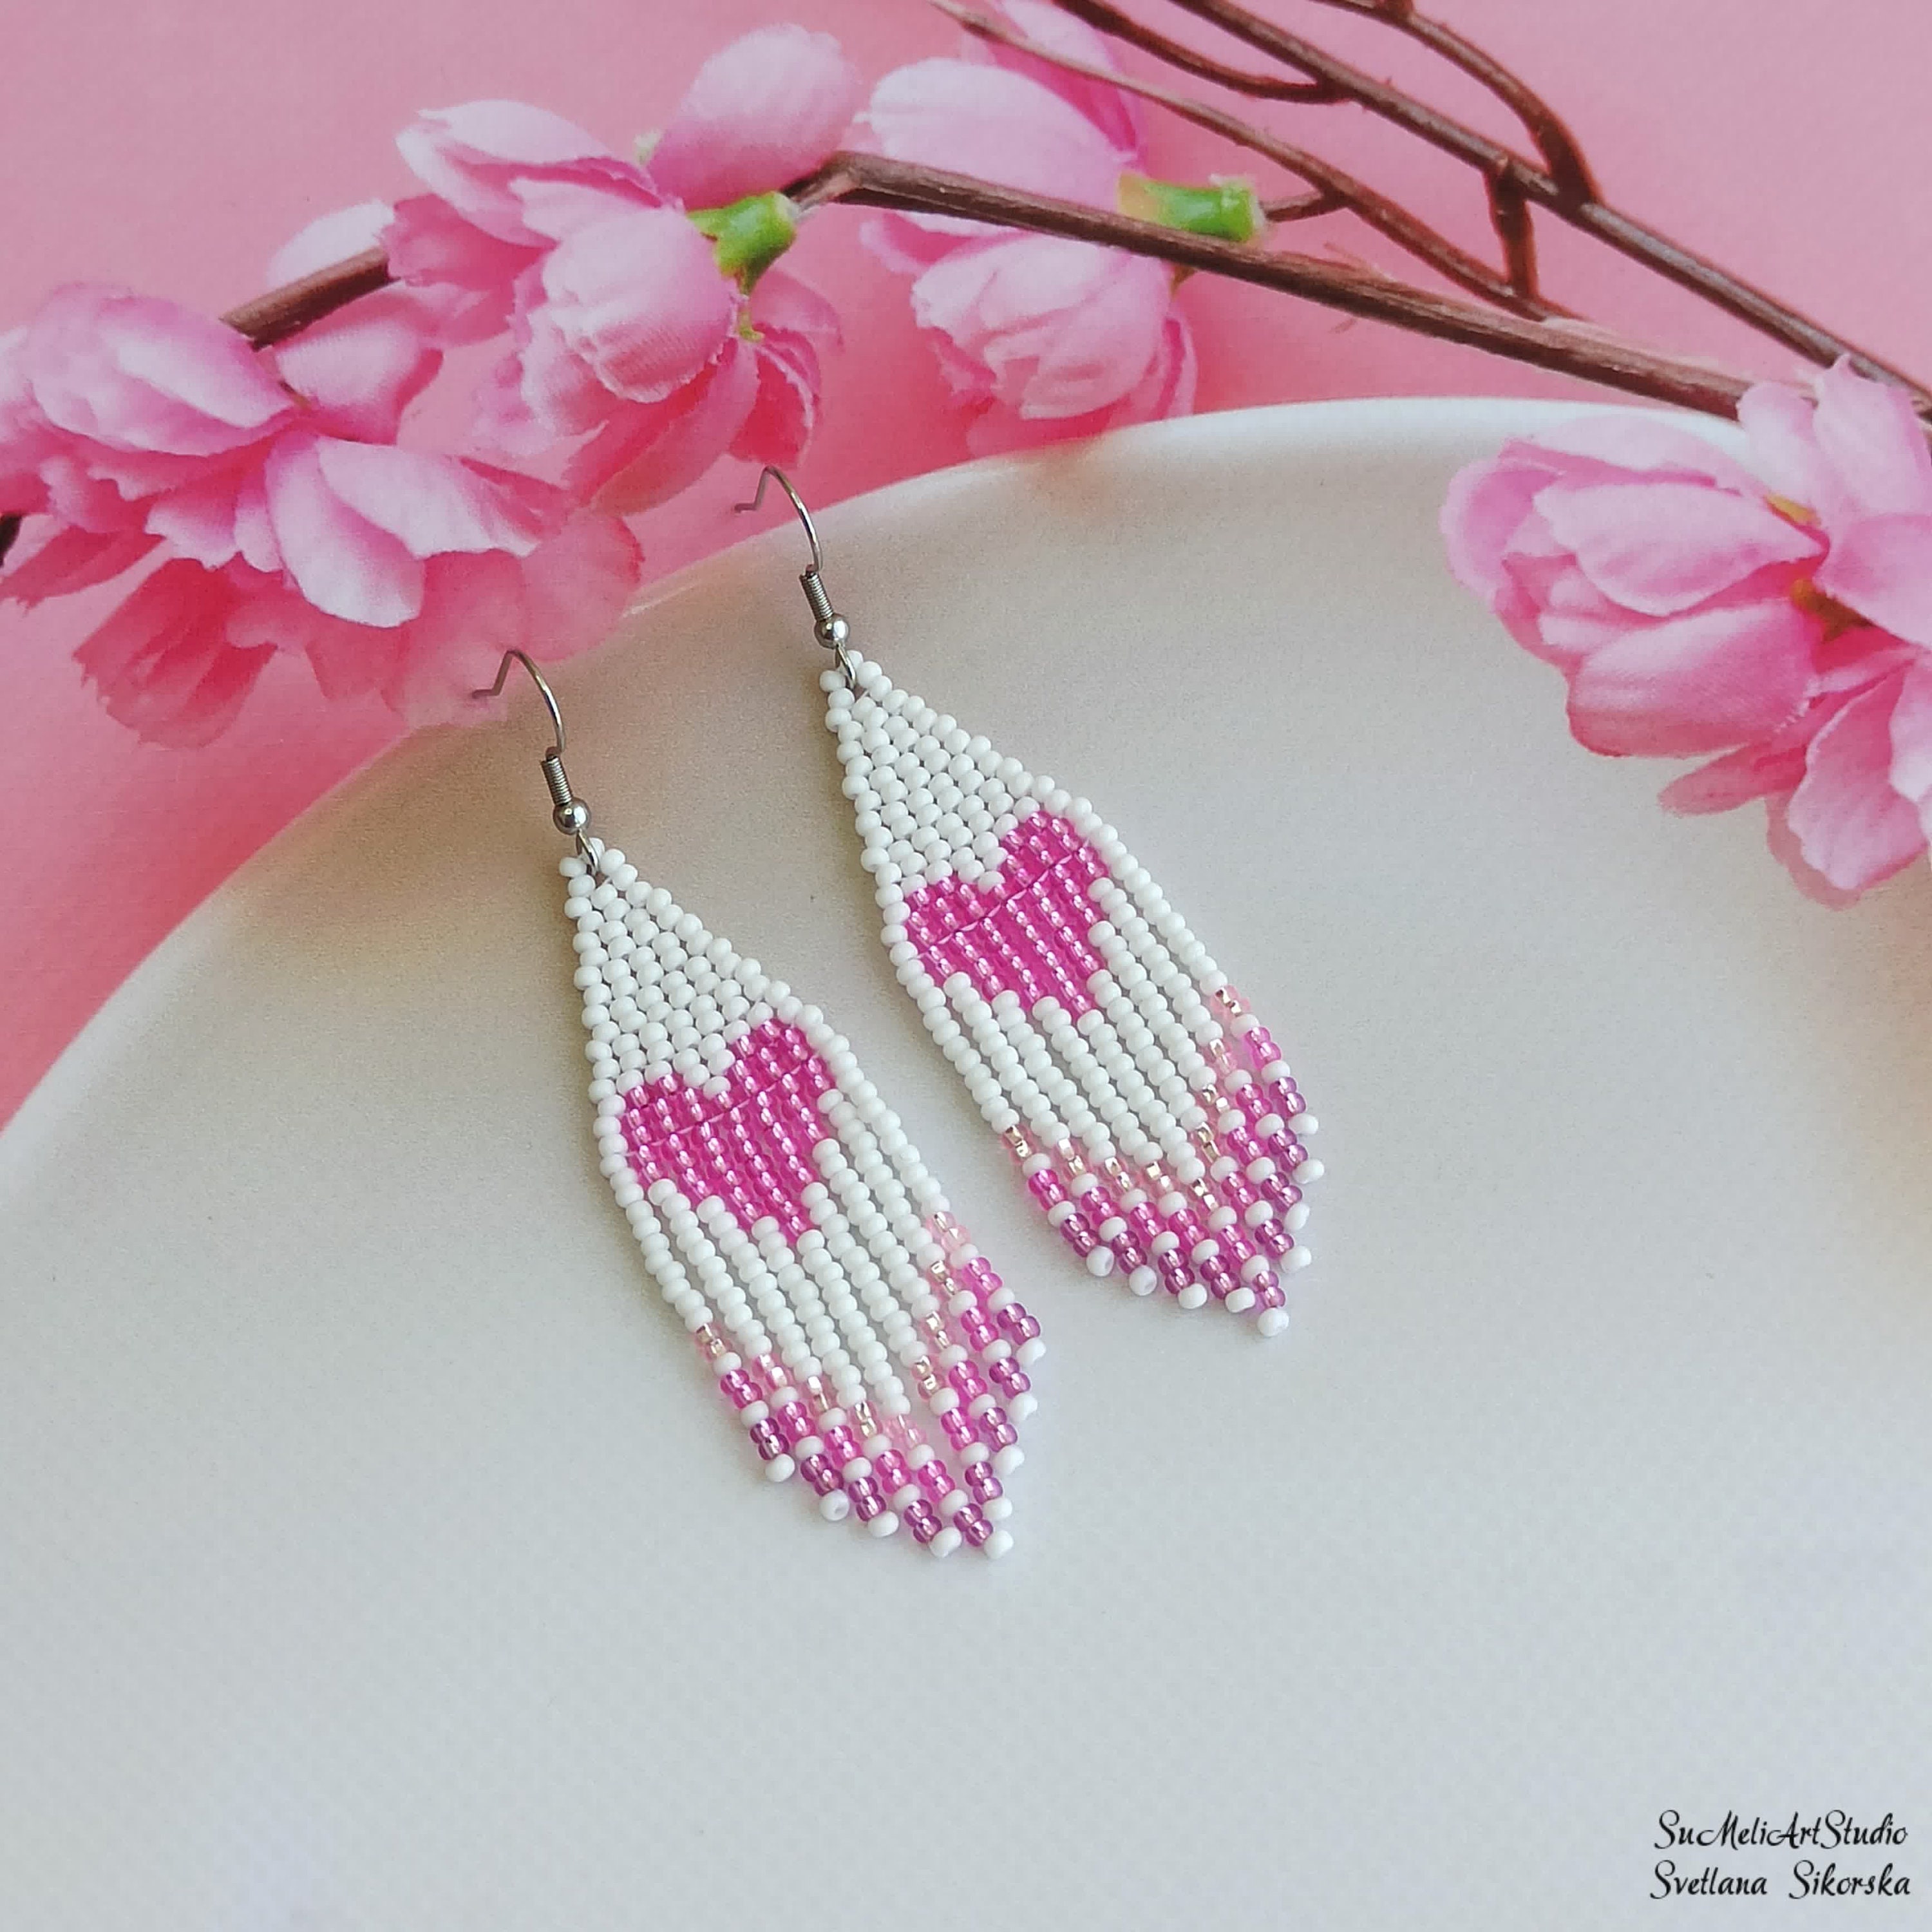 VALENTINE'S DAY SEED BEAD DROP EARRINGS Pink Serises Vday Date Night Love  XOXO Heart Kiss Festive Holiday Earrings Cowgirl Gift